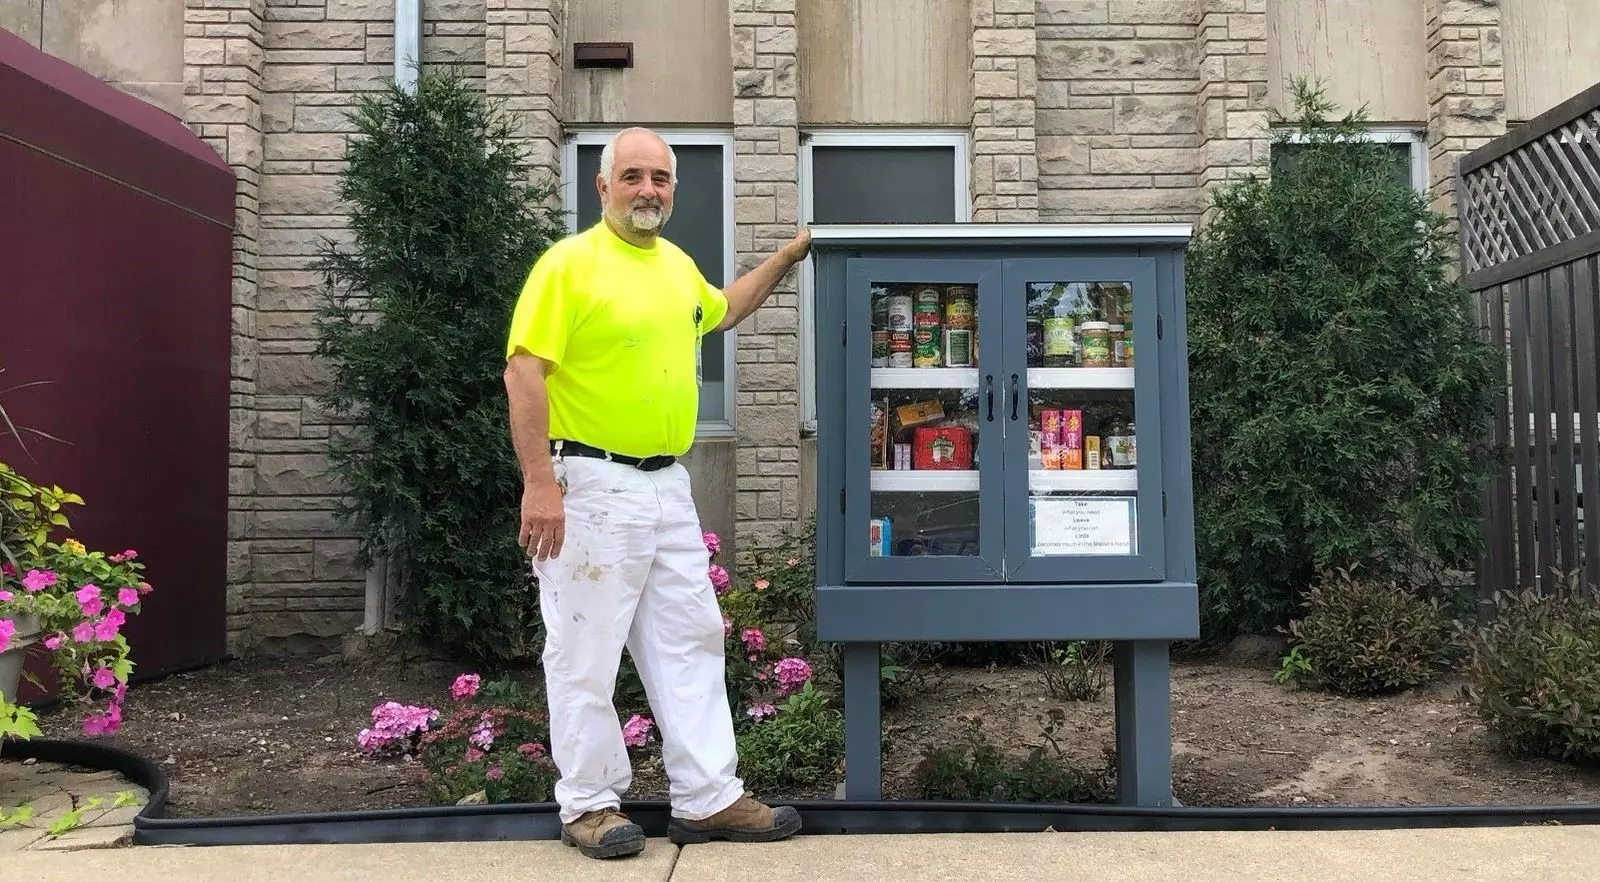 The micropantry built by AdventHealth Hinsdale team member Mark Fialkowski encourages people to “Take what you need. Leave what you can.”